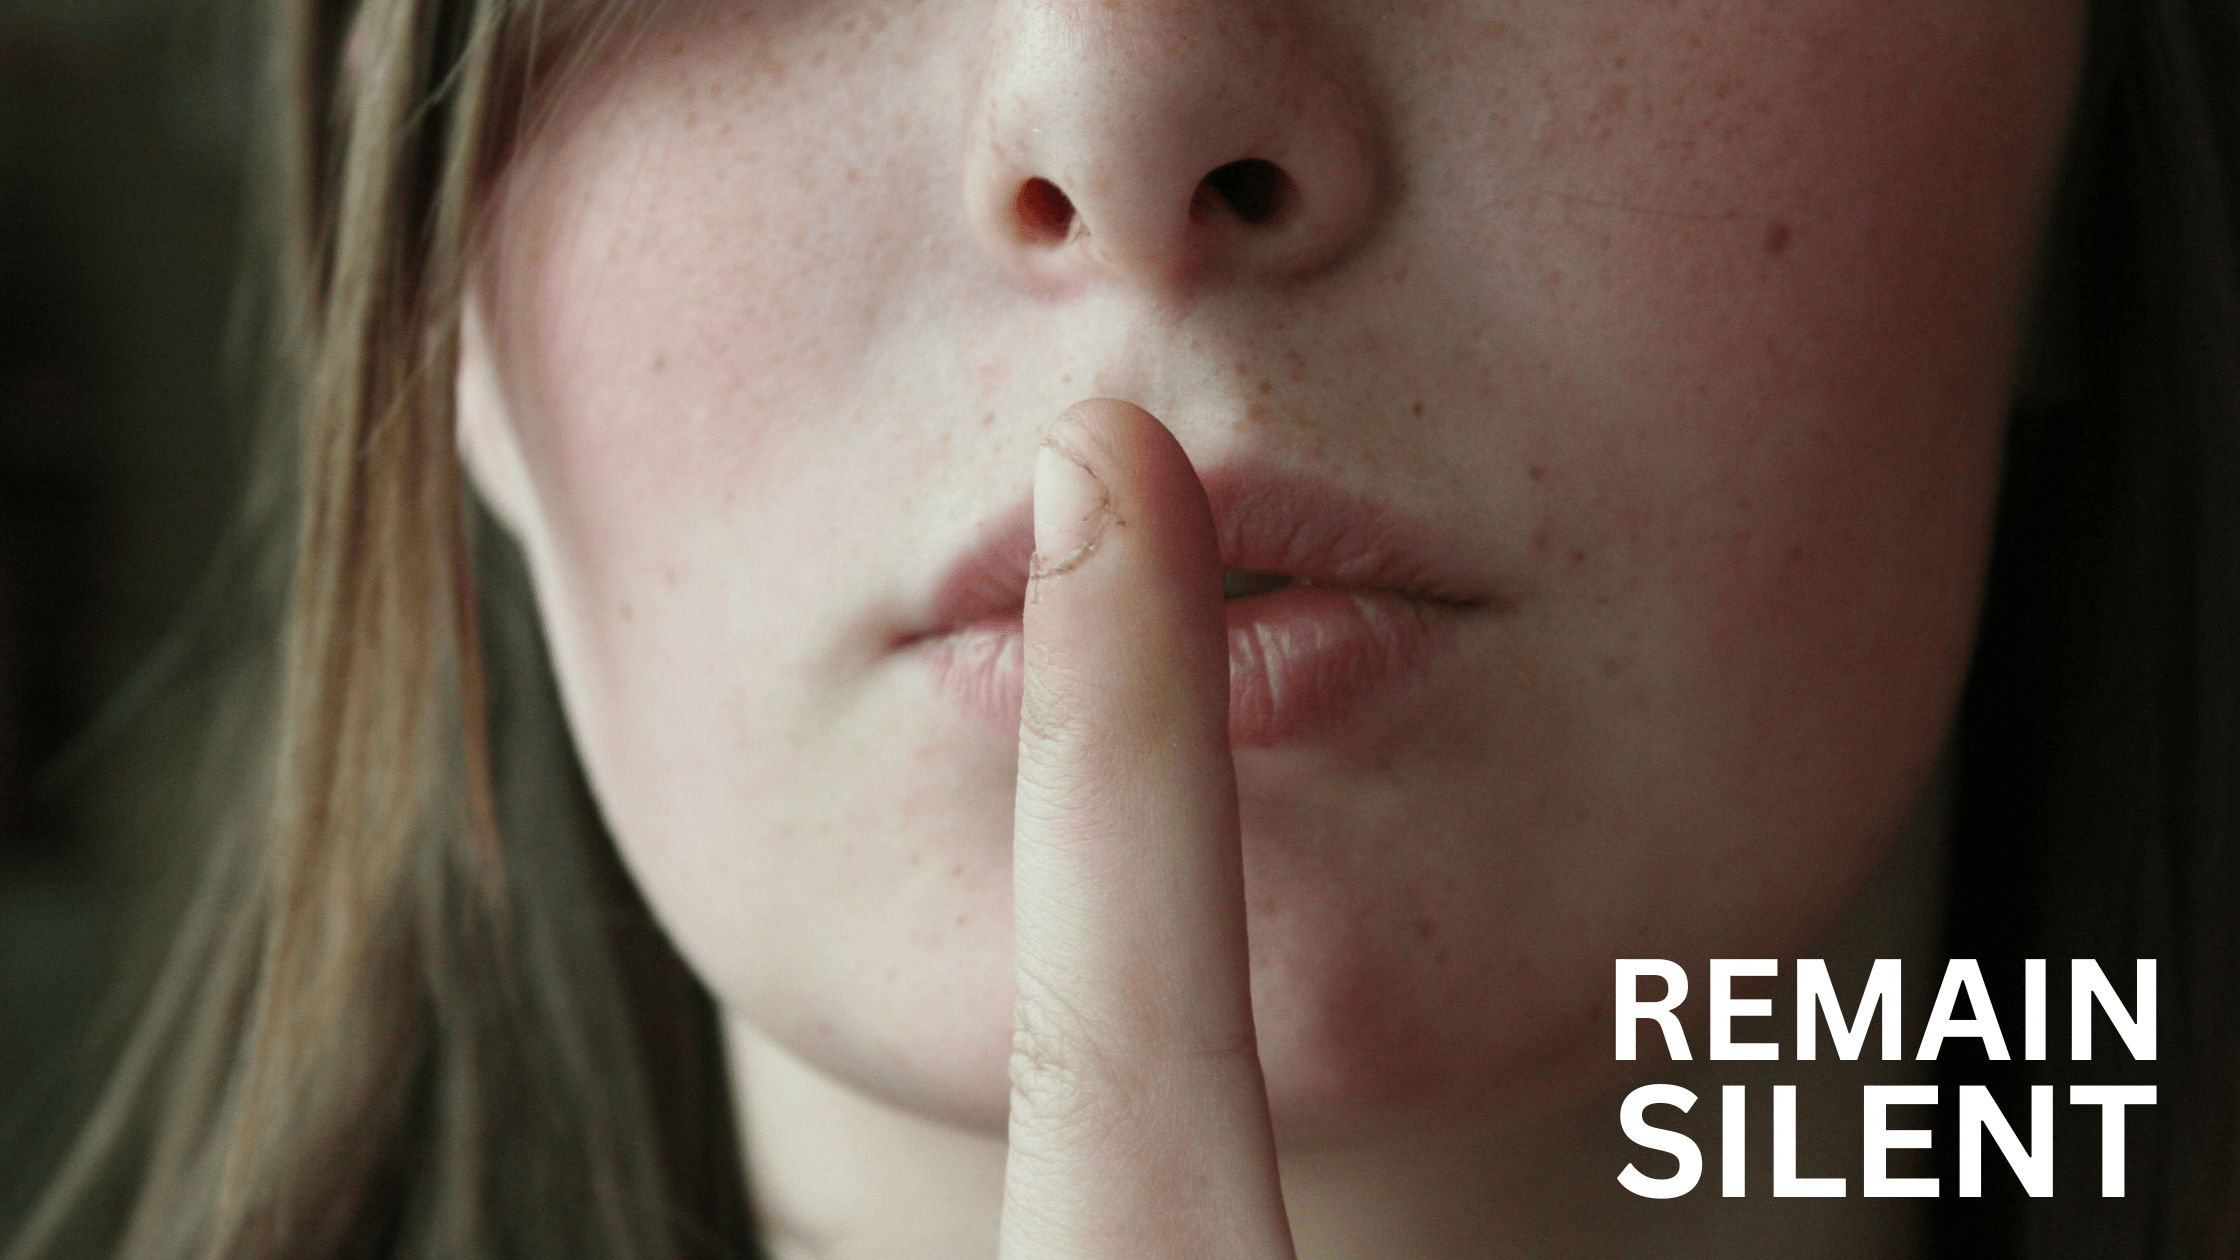 Young woman making shush gesture with REMAIN SILENT text overlay.